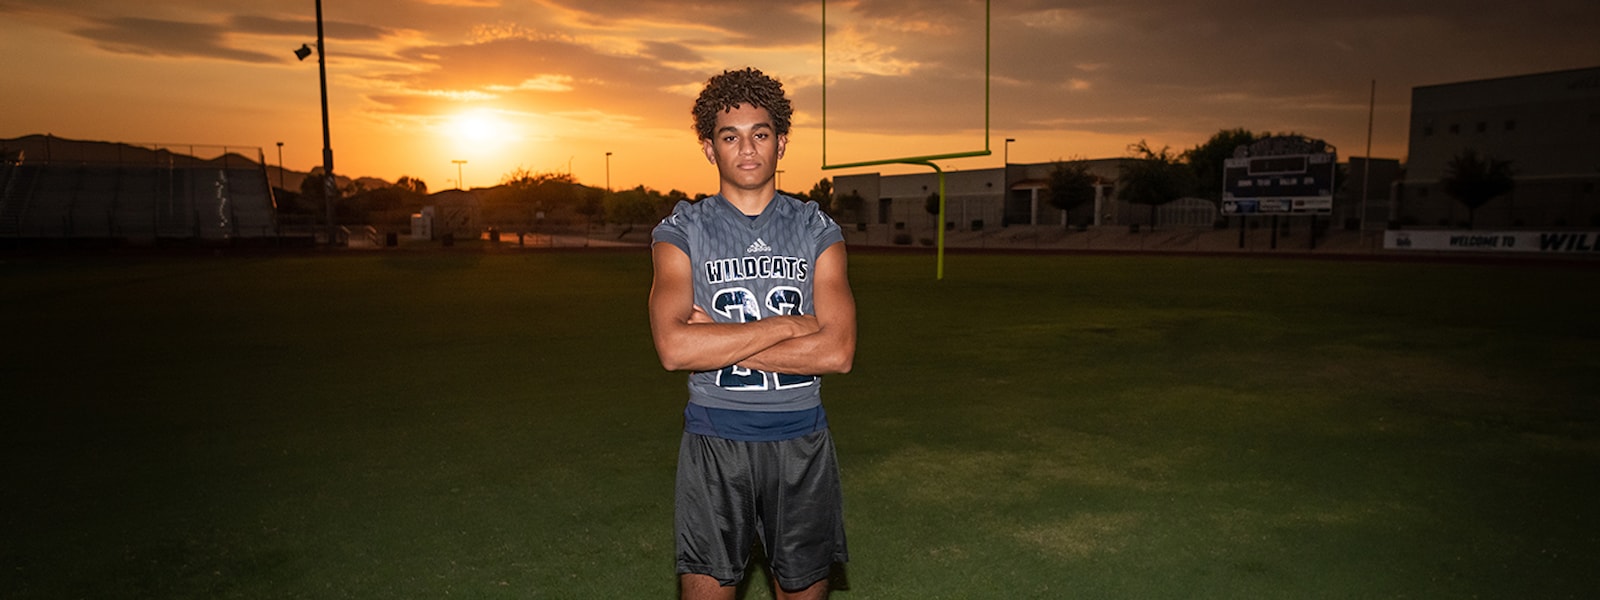 Dion Hafner poses for a photograph at sunset.